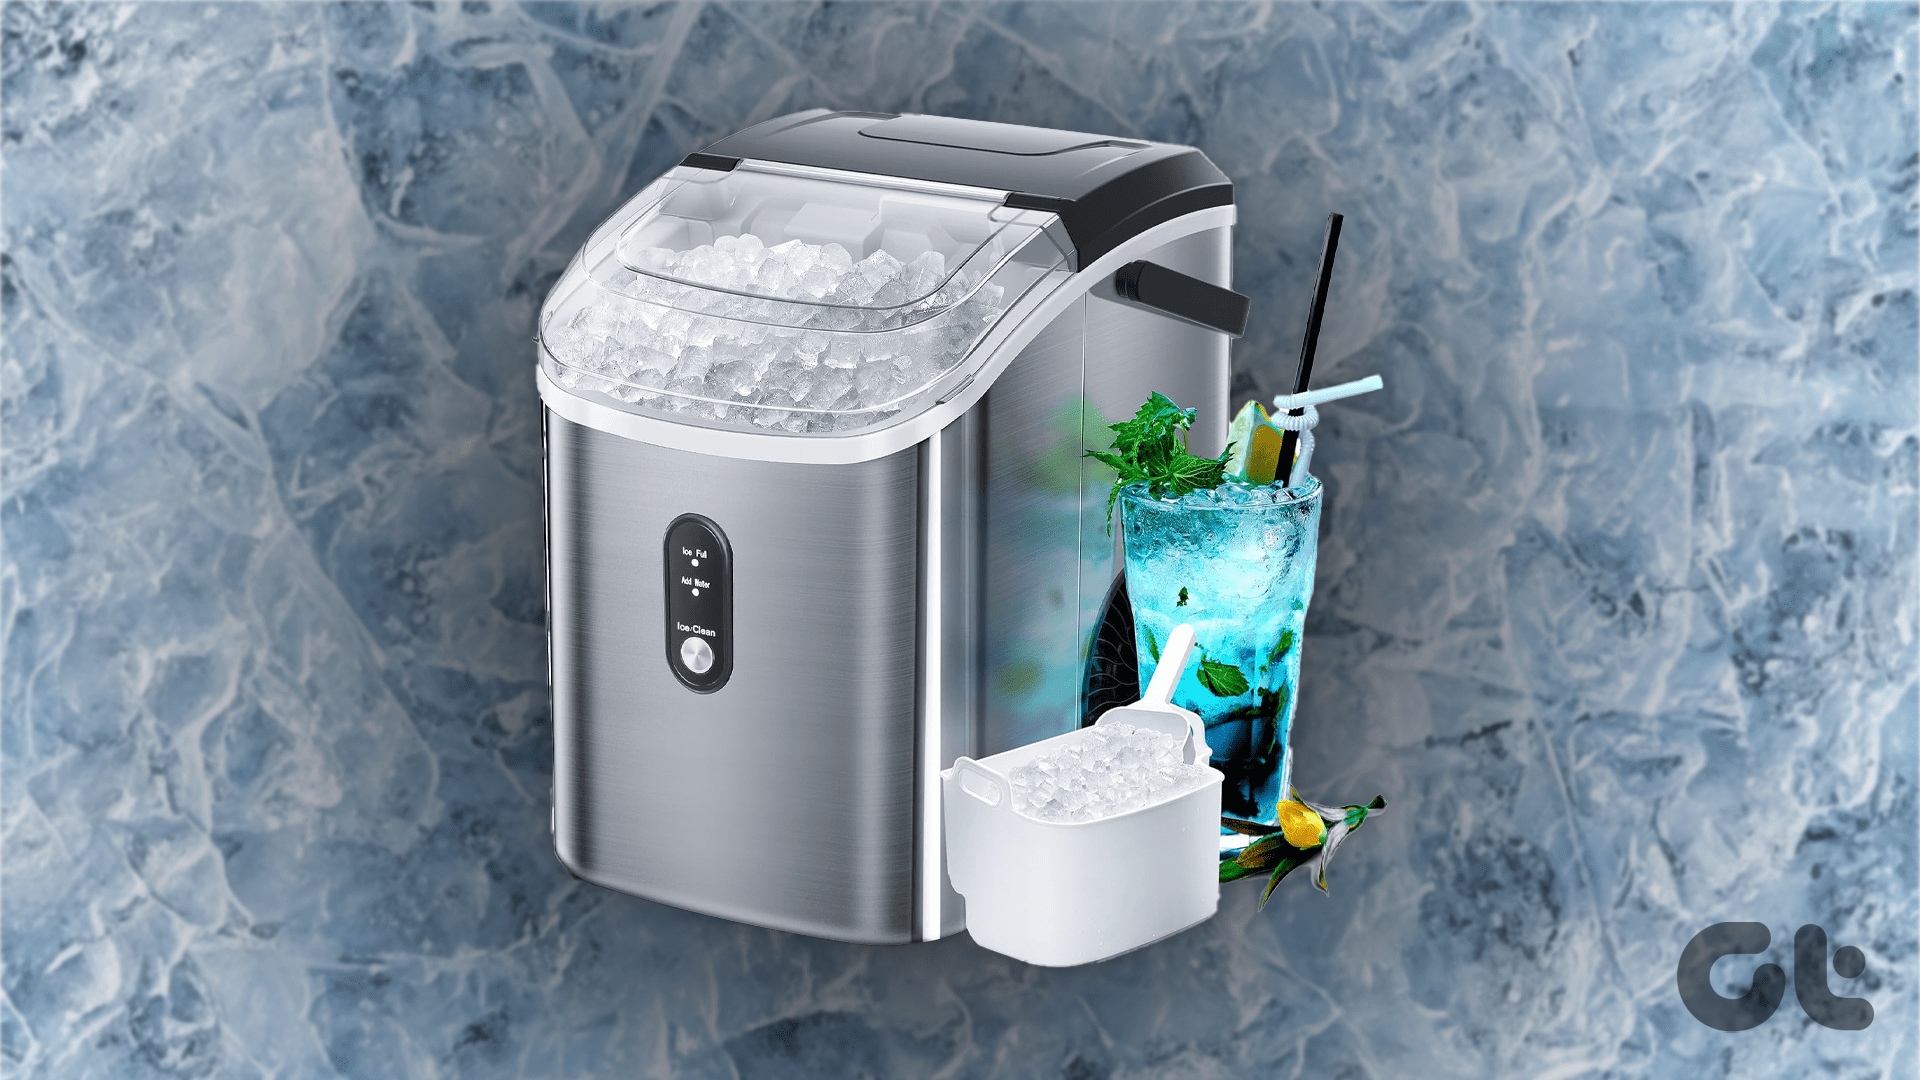 AGLUCKY Nugget Ice Maker - Solid! 